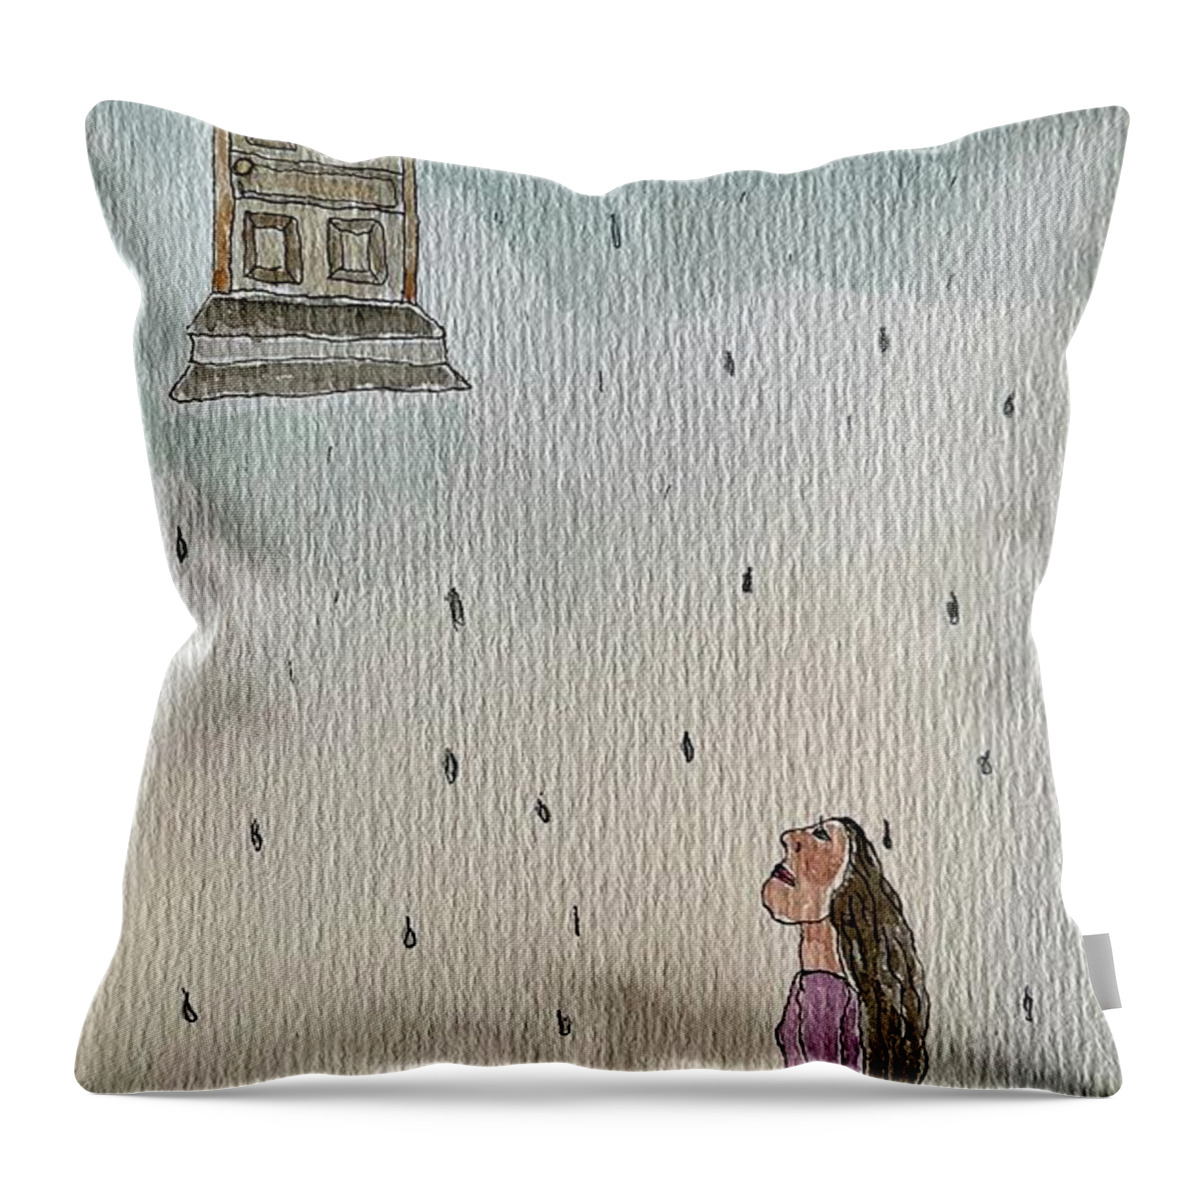  Throw Pillow featuring the painting Some Day by Theresa Marie Johnson